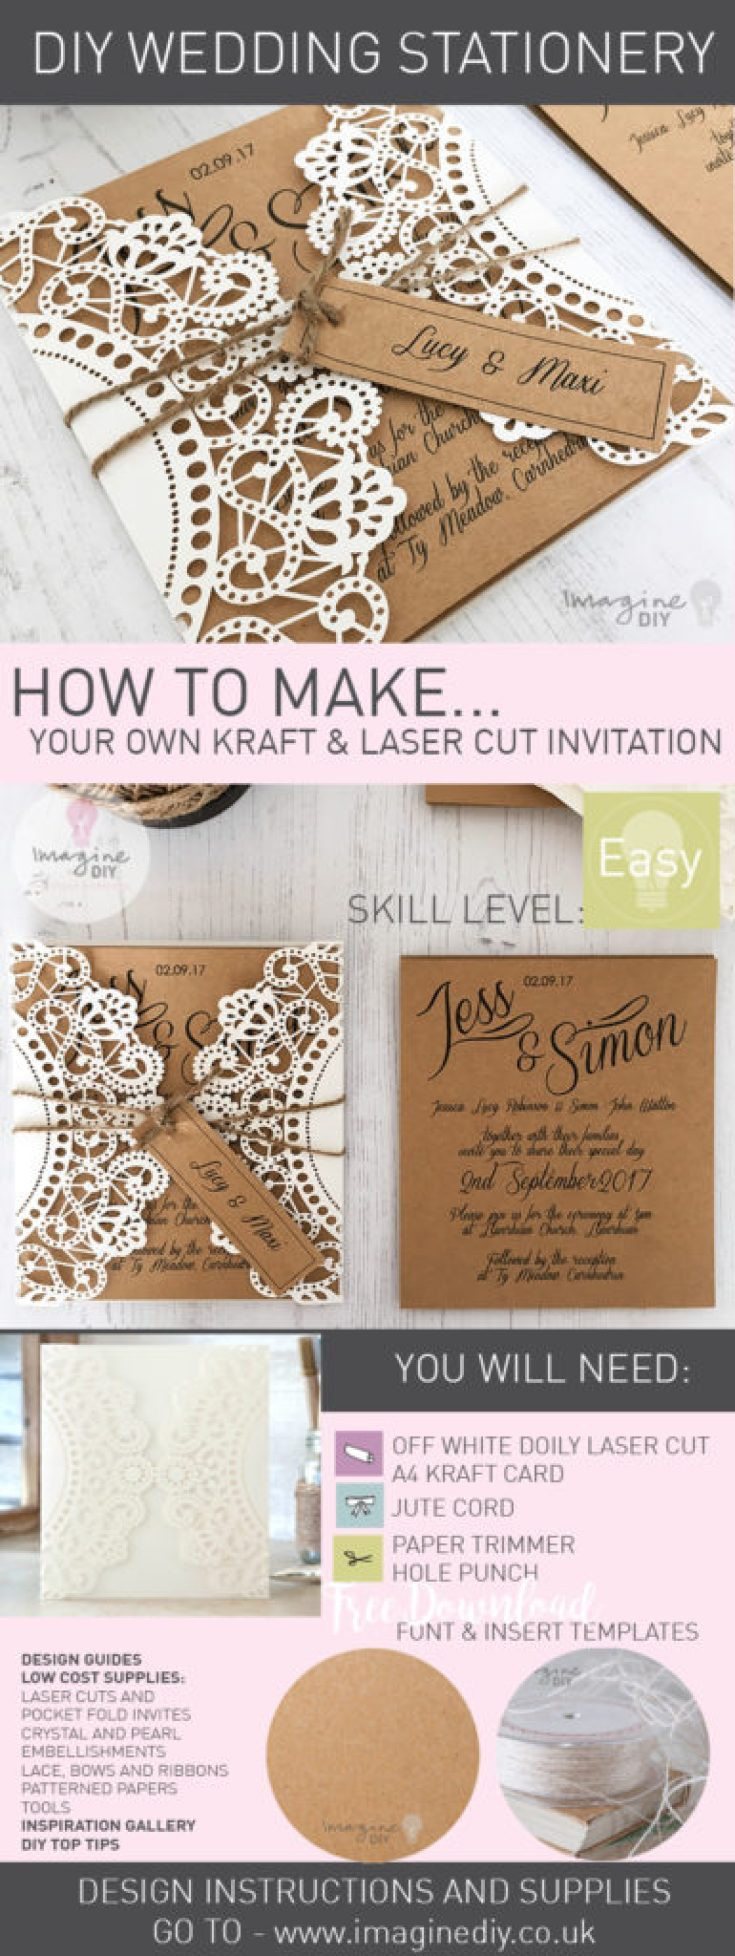 Laser Cut Wedding Invitations DIY
 How To Make Rustic Kraft and Laser Cut Invitation with